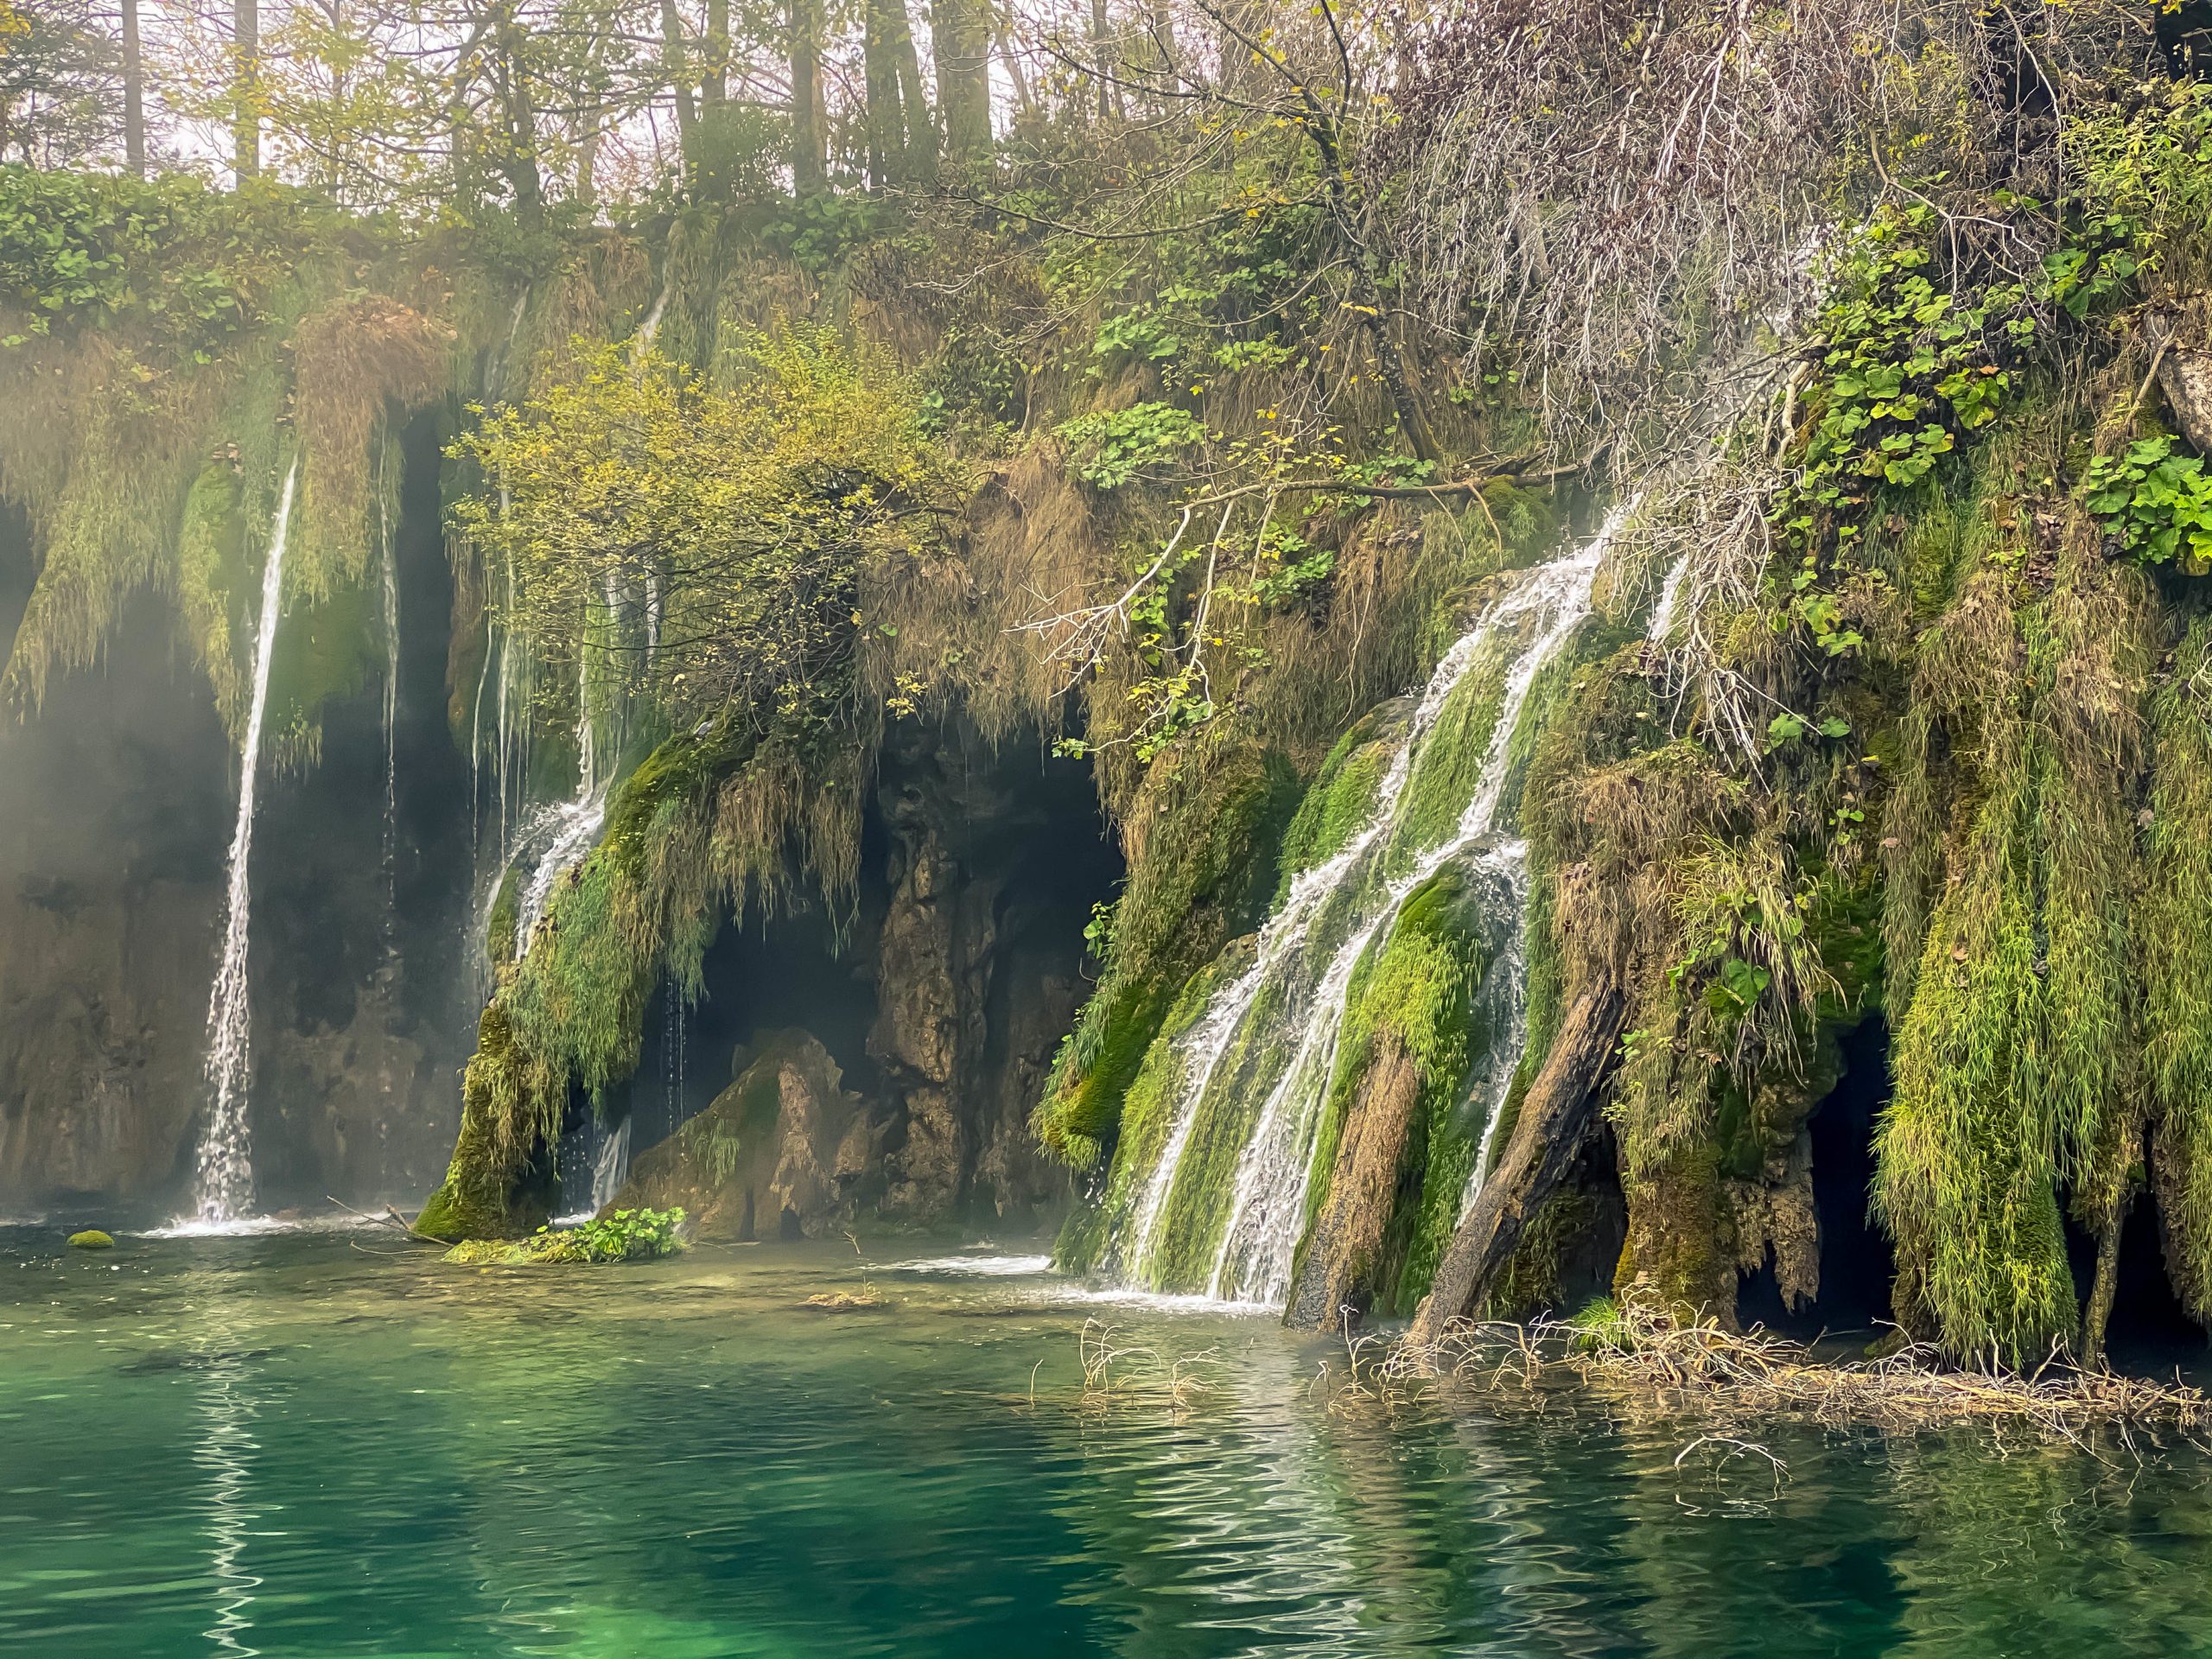 Discount Tickets for National Park Plitvice Lakes until 18.06.2020.